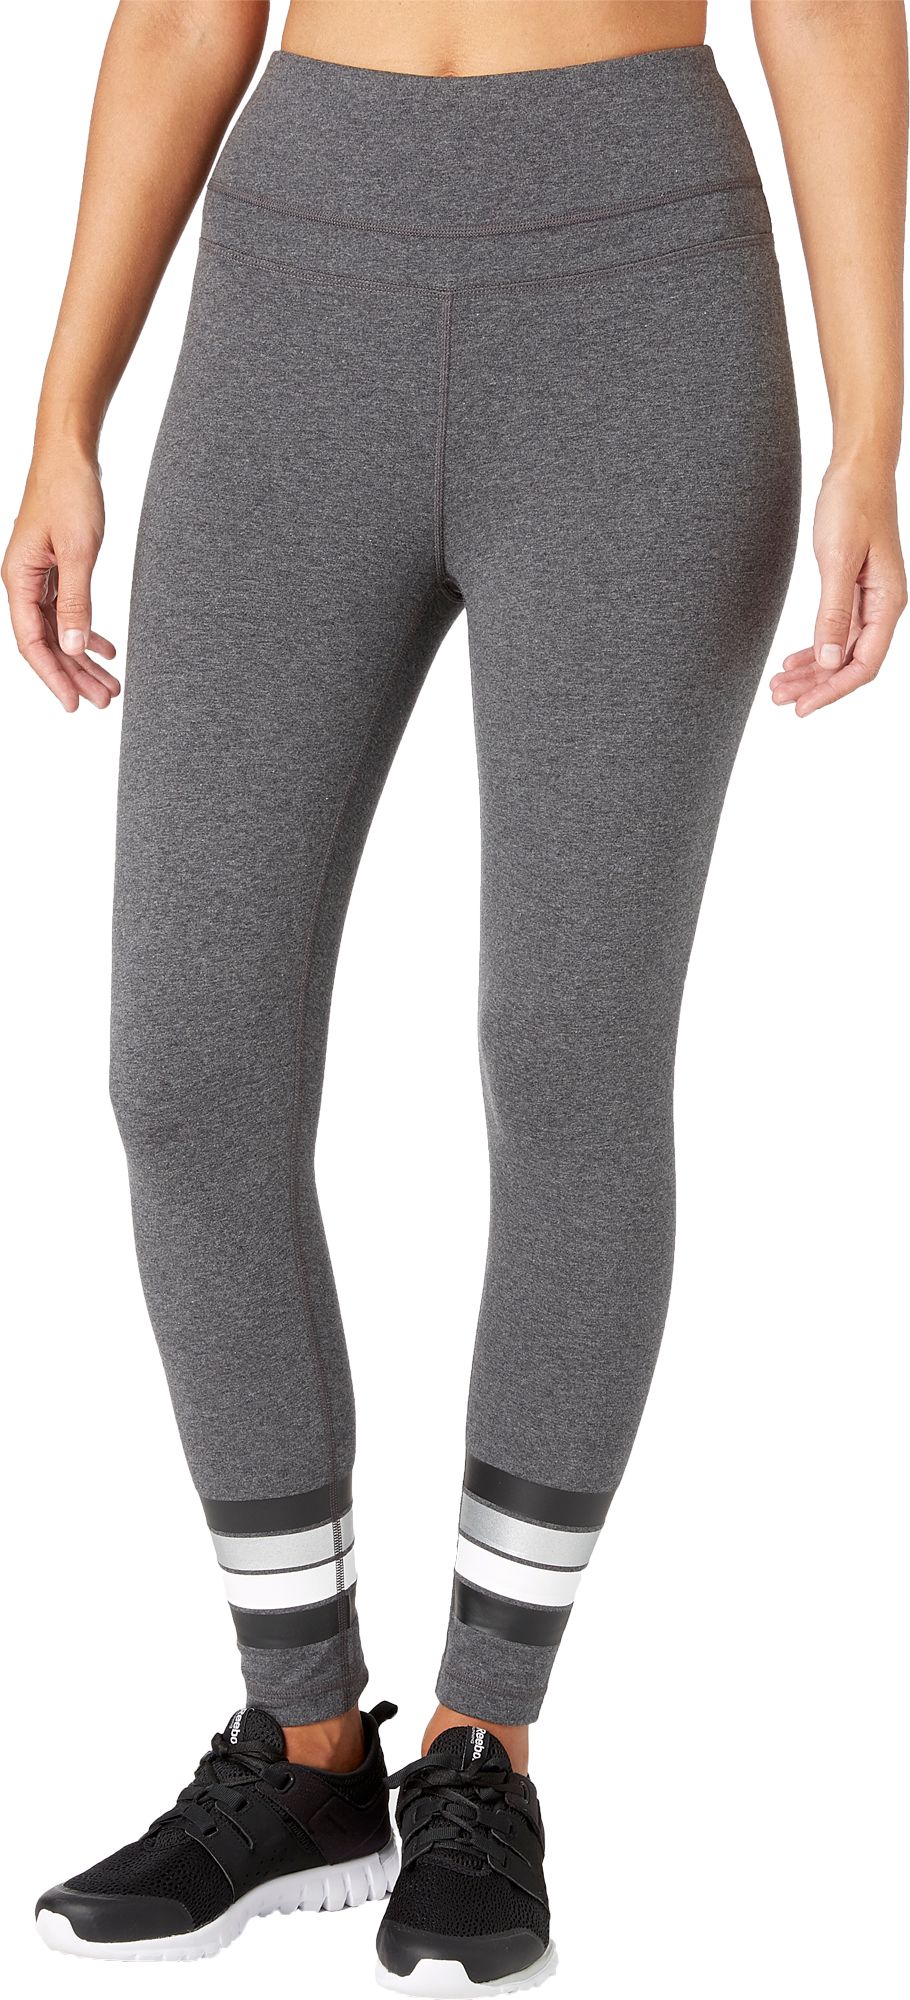 Workout Pants for Women | Best Price Guarantee at DICK'S